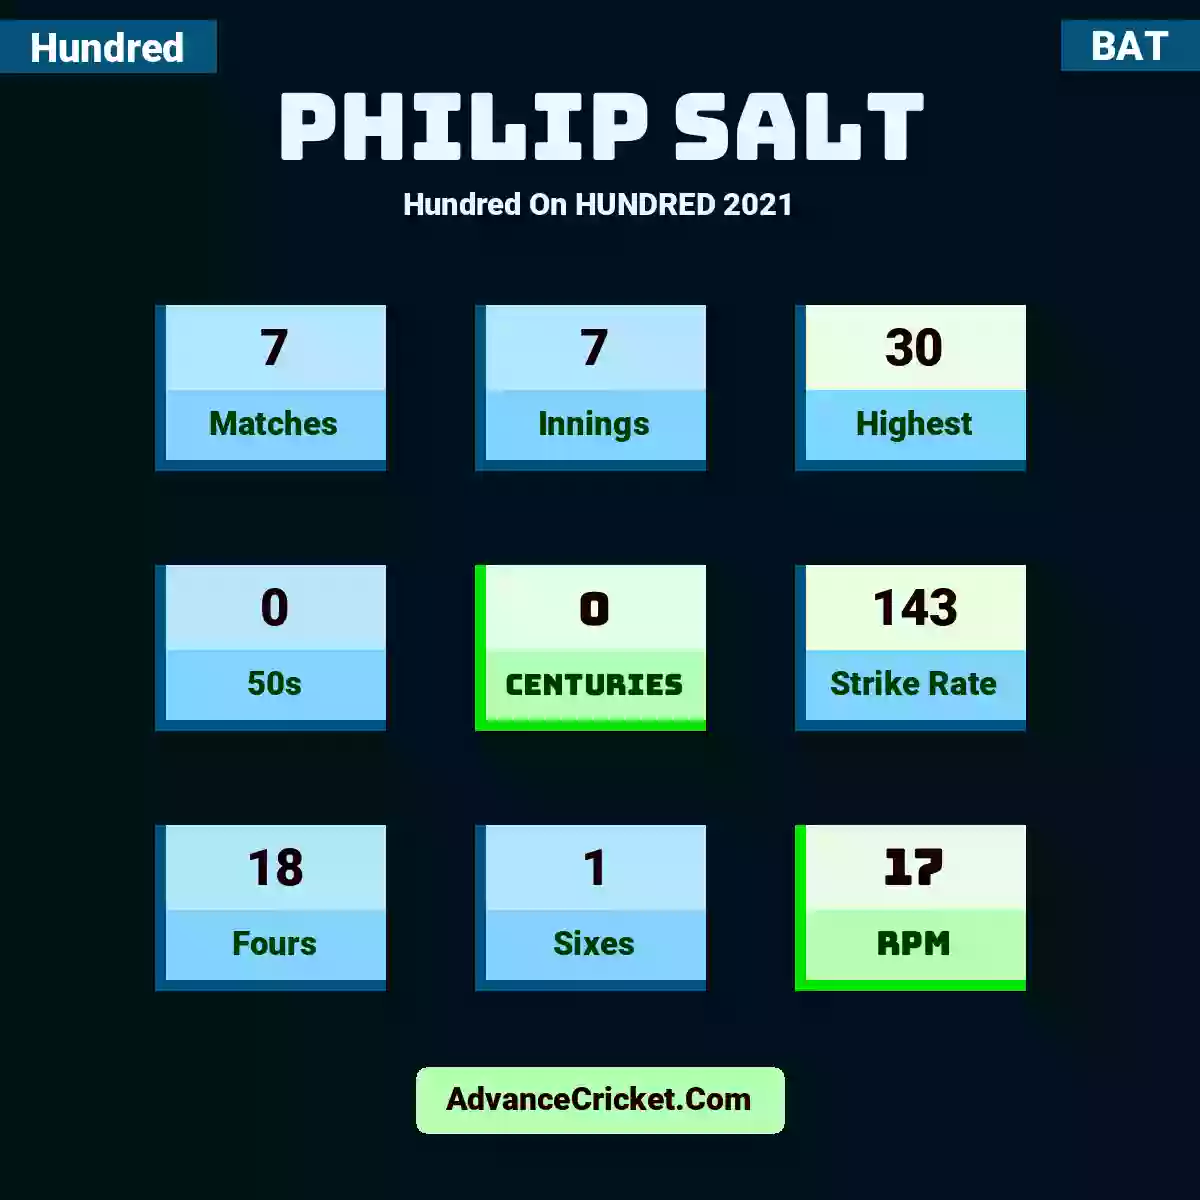 Philip Salt Hundred  On HUNDRED 2021, Philip Salt played 7 matches, scored 30 runs as highest, 0 half-centuries, and 0 centuries, with a strike rate of 143. P.Salt hit 18 fours and 1 sixes, with an RPM of 17.